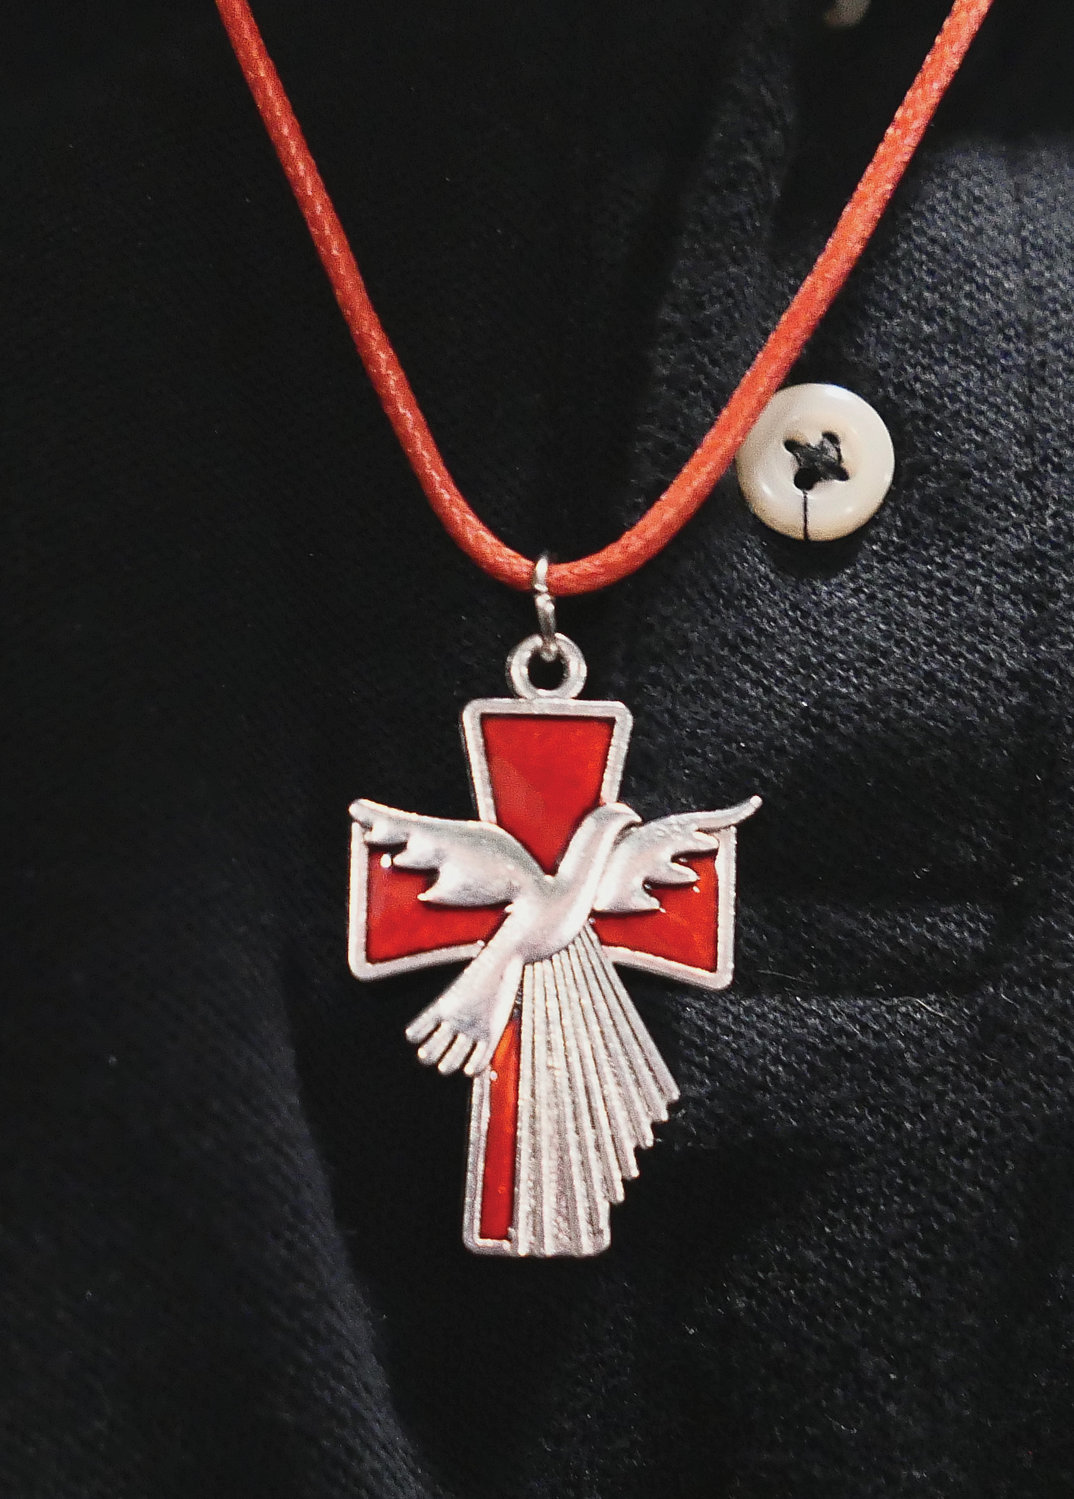 Retreatants were given a medal with the dove symbolizing the Holy Spirit on the cross.